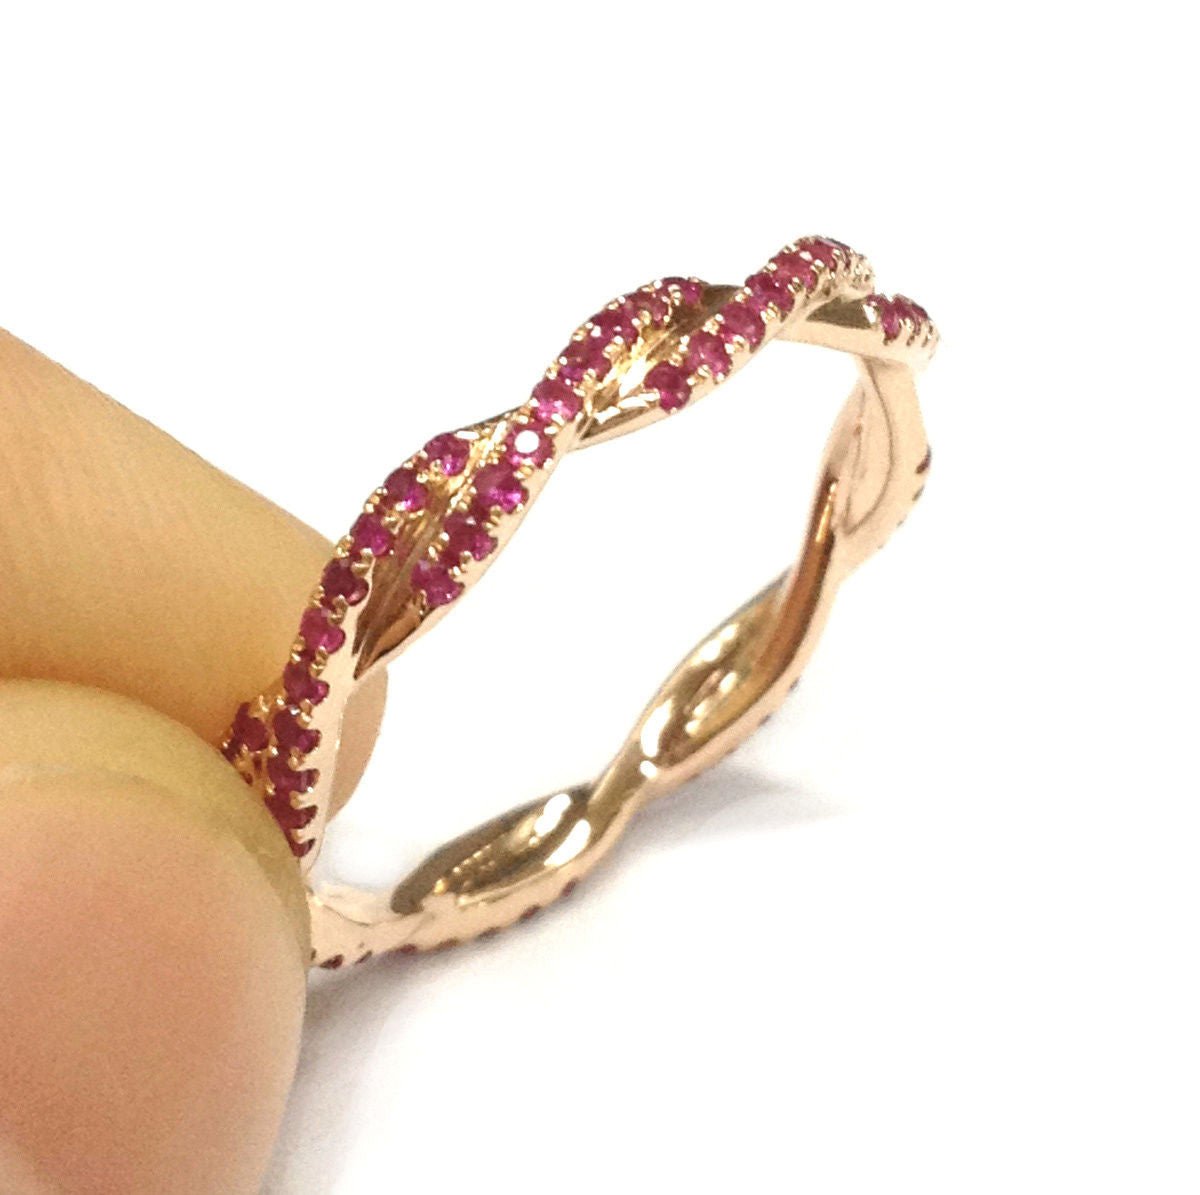 Pave-Set Ruby Sapphire Twisted September Birthstone Band - Lord of Gem Rings